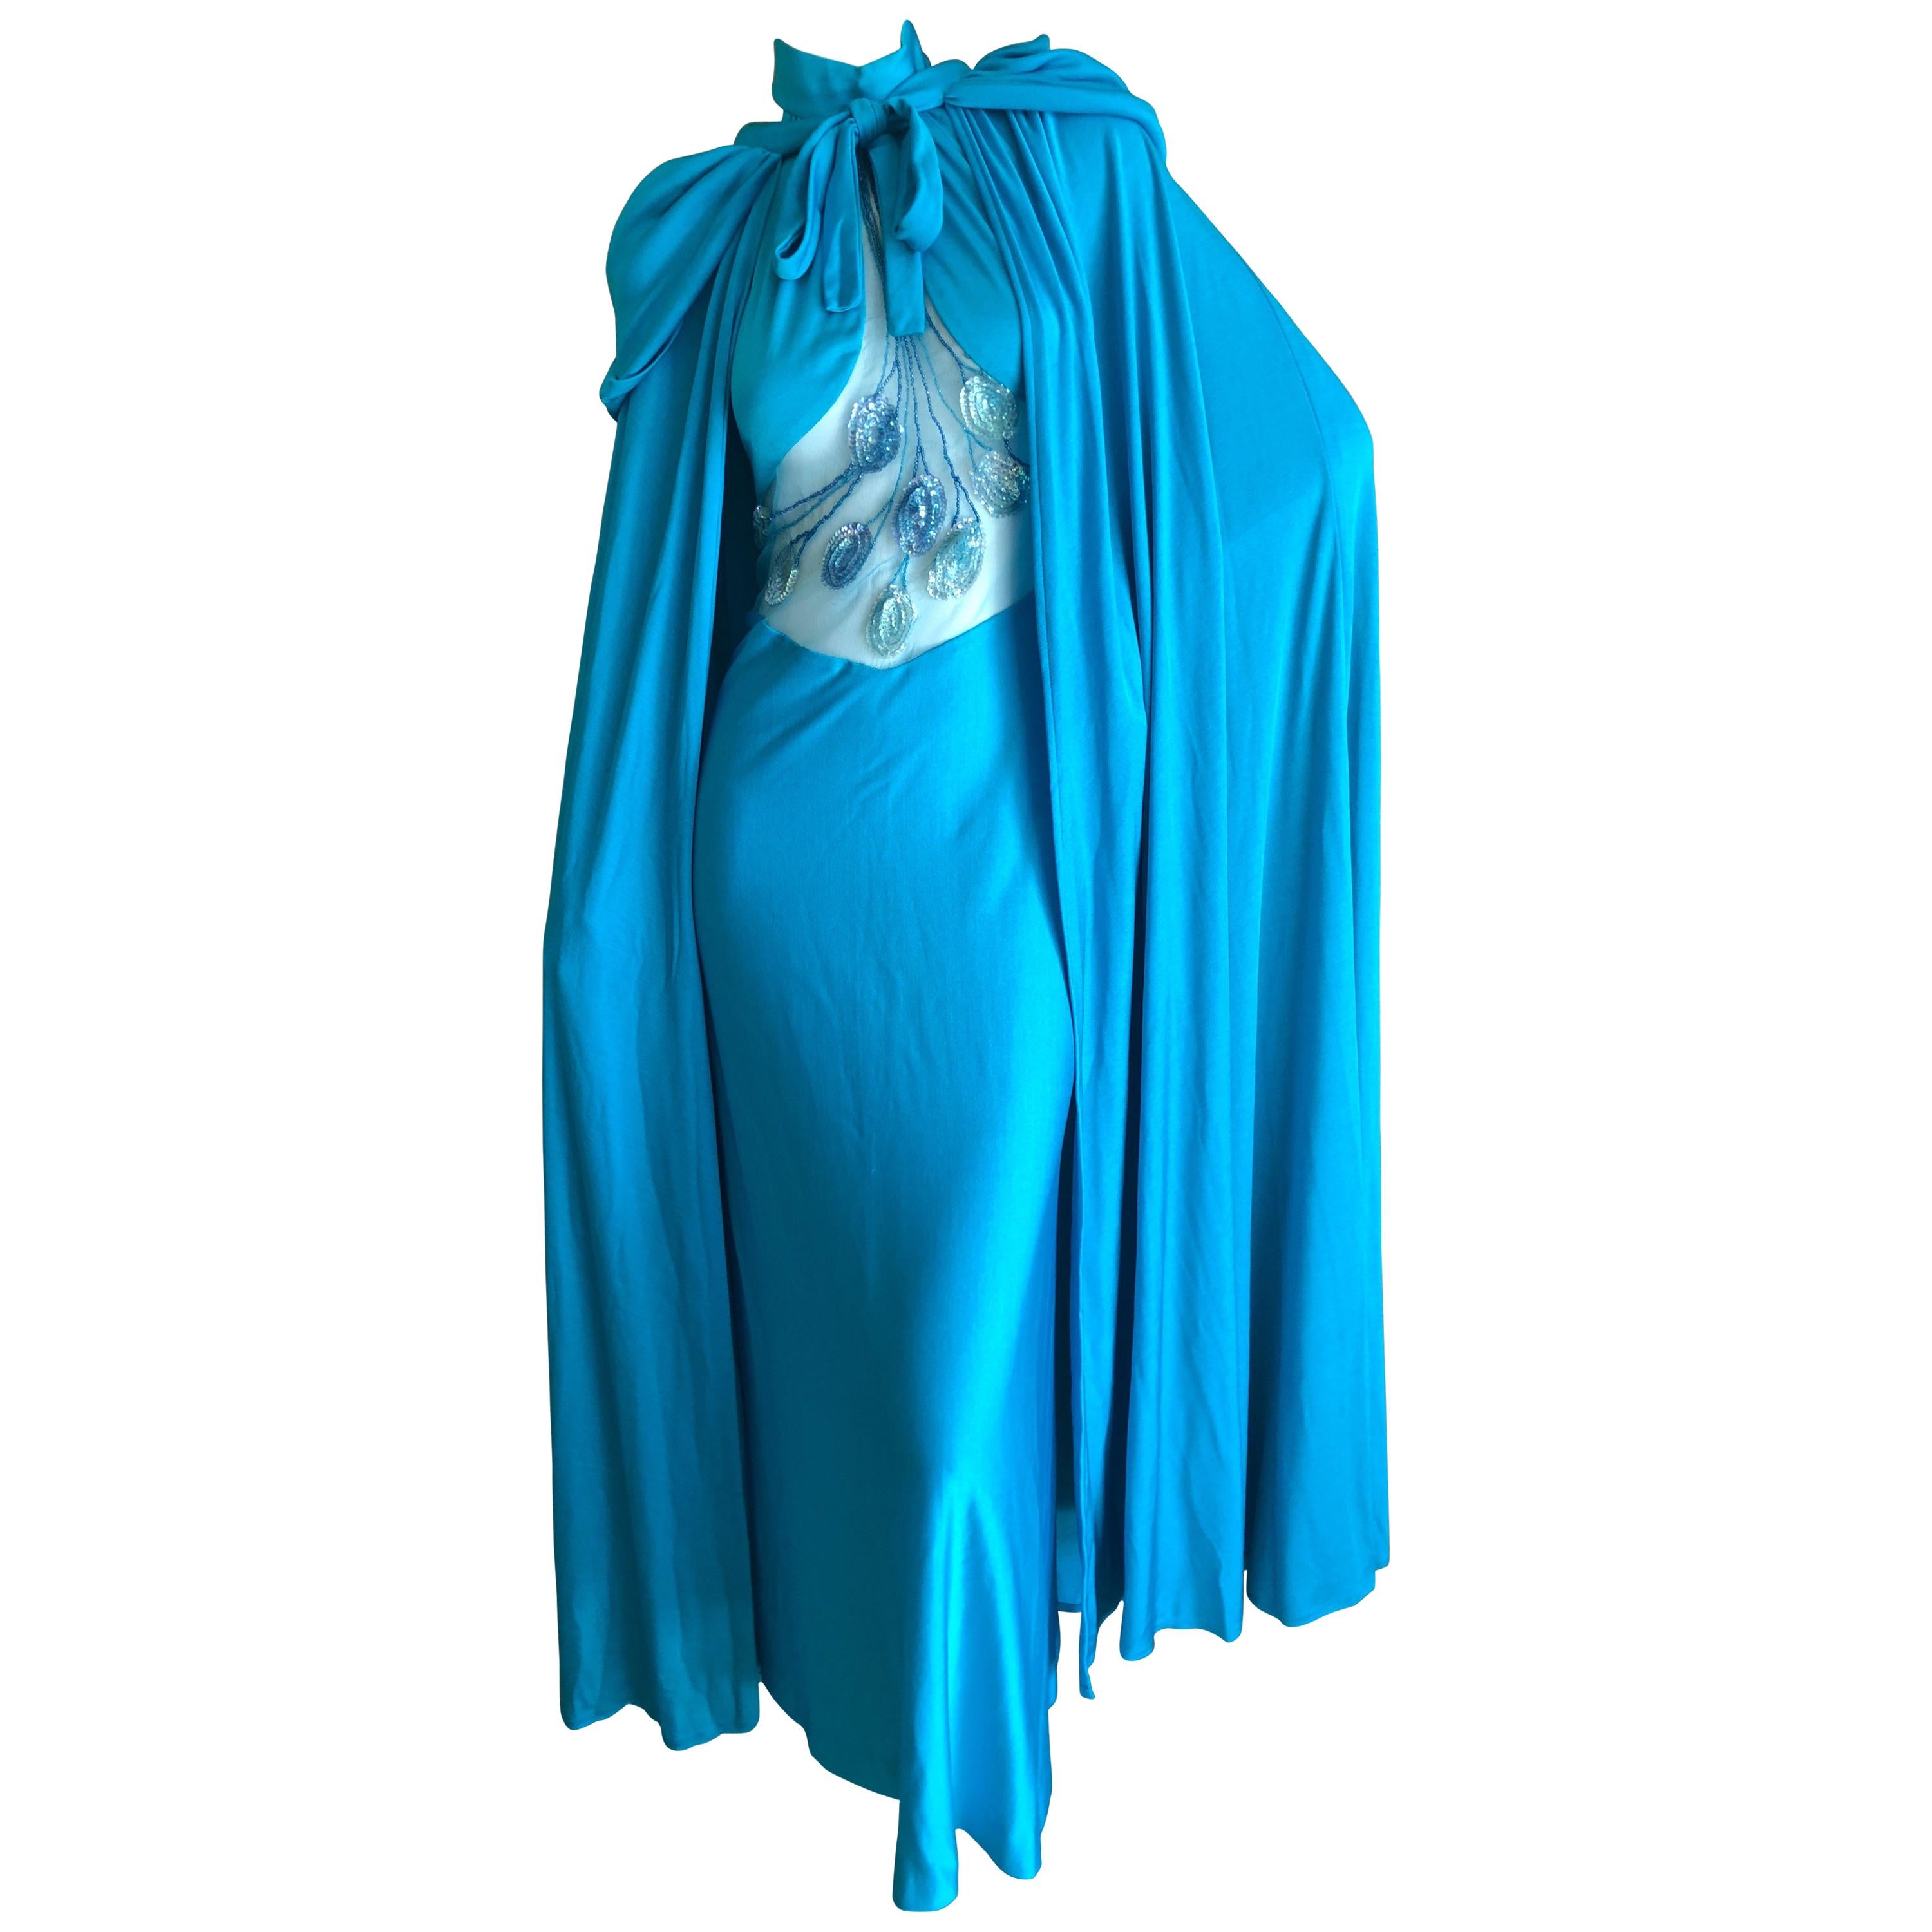 Loris Azzaro Couture 1970s Sheer Sequin Accented Turquoise Blue Dress and Cape.
This is so wonderful, sheer sequin dress with matching hooded cape.
Measured with out stretching 
Bust 34